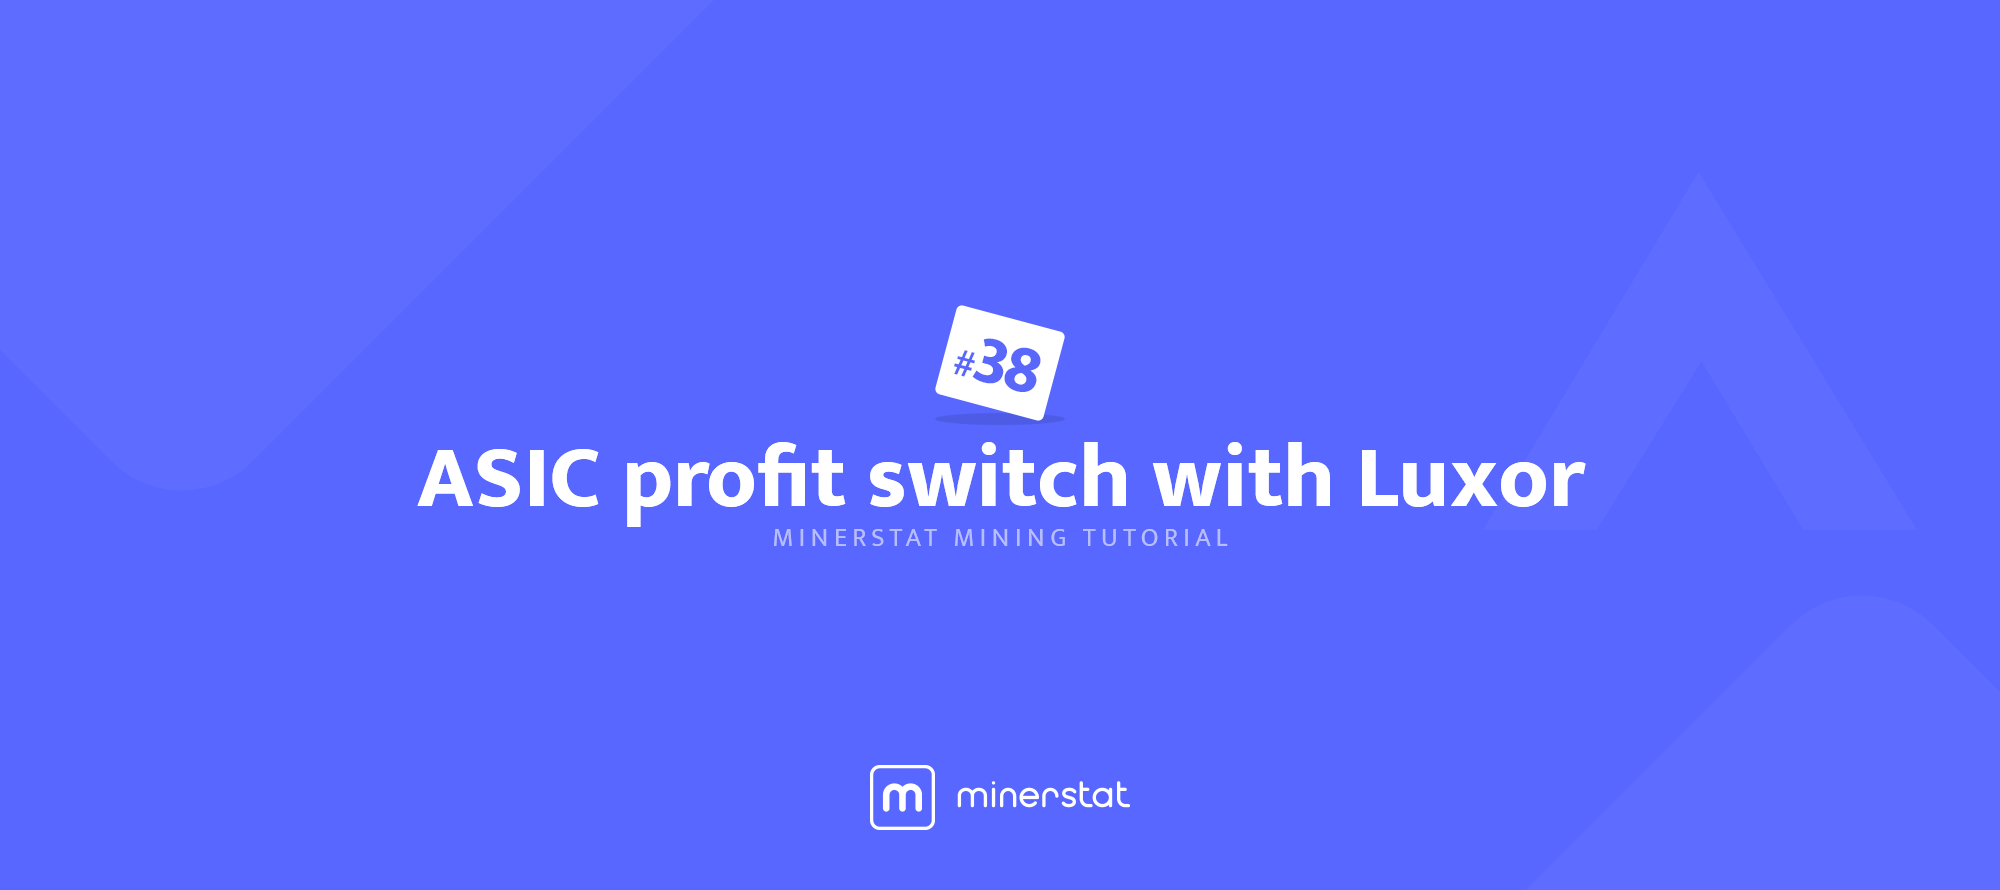 minerstat mining tutorial #38: ASIC profit switch with ...